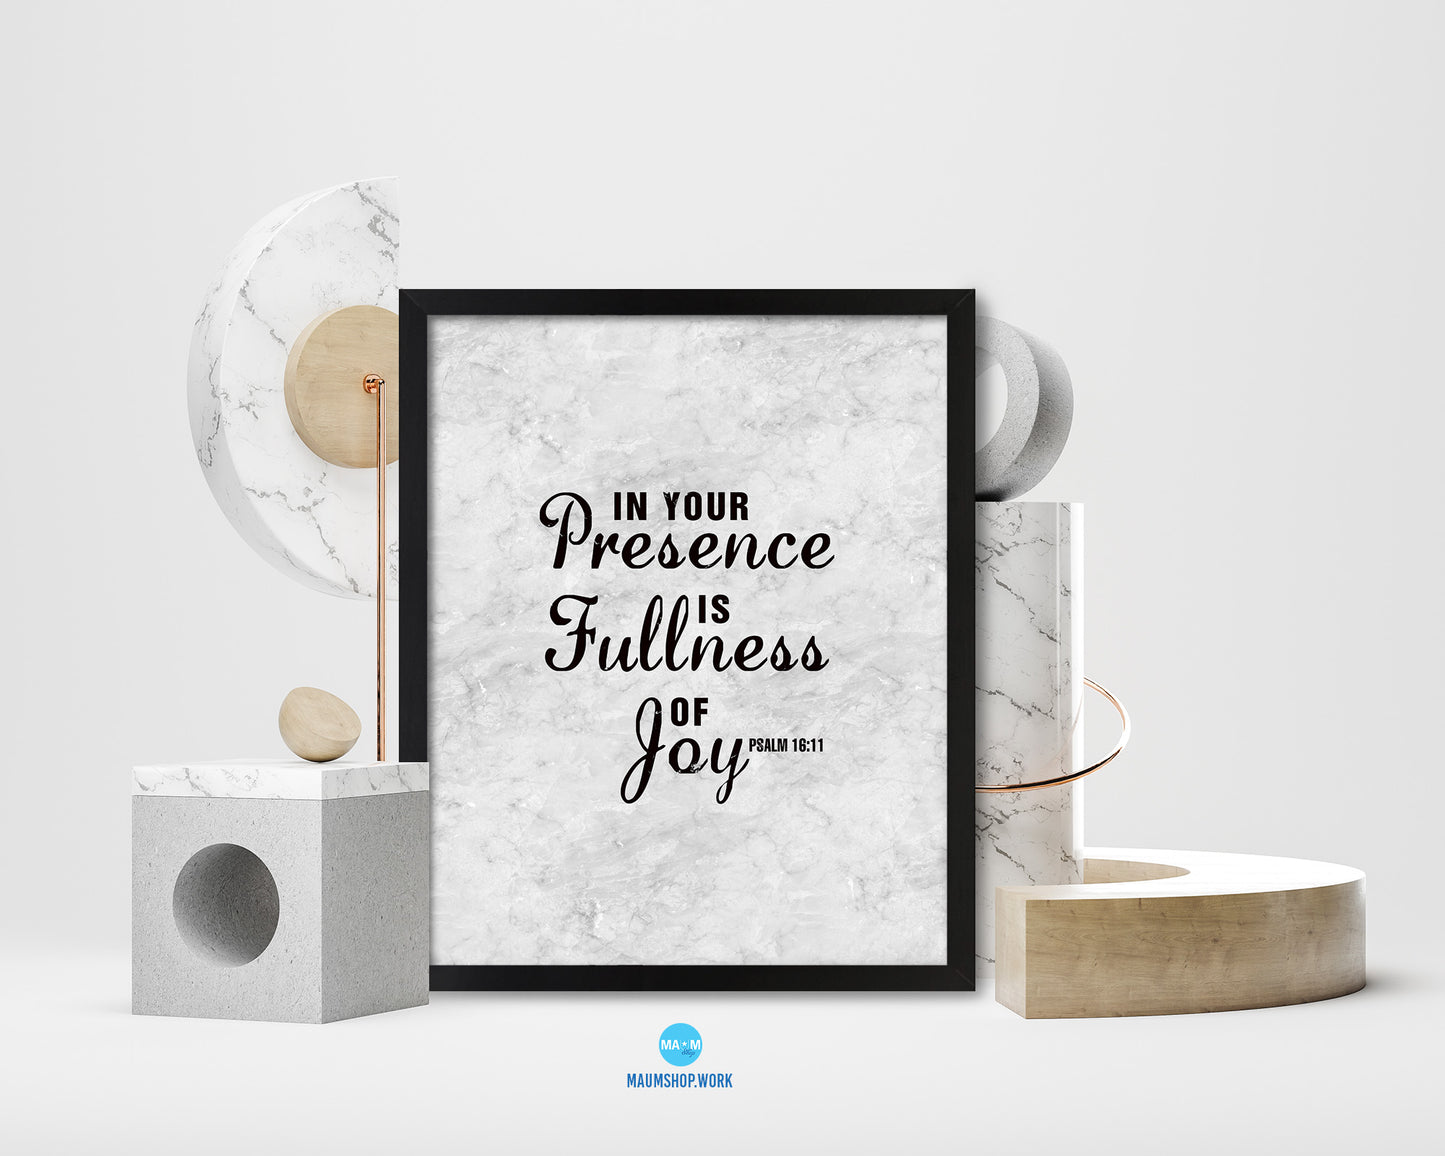 In your presence is fullness of joy, Psalm 16:11 Bible Scripture Verse Framed Print Wall Art Decor Gifts